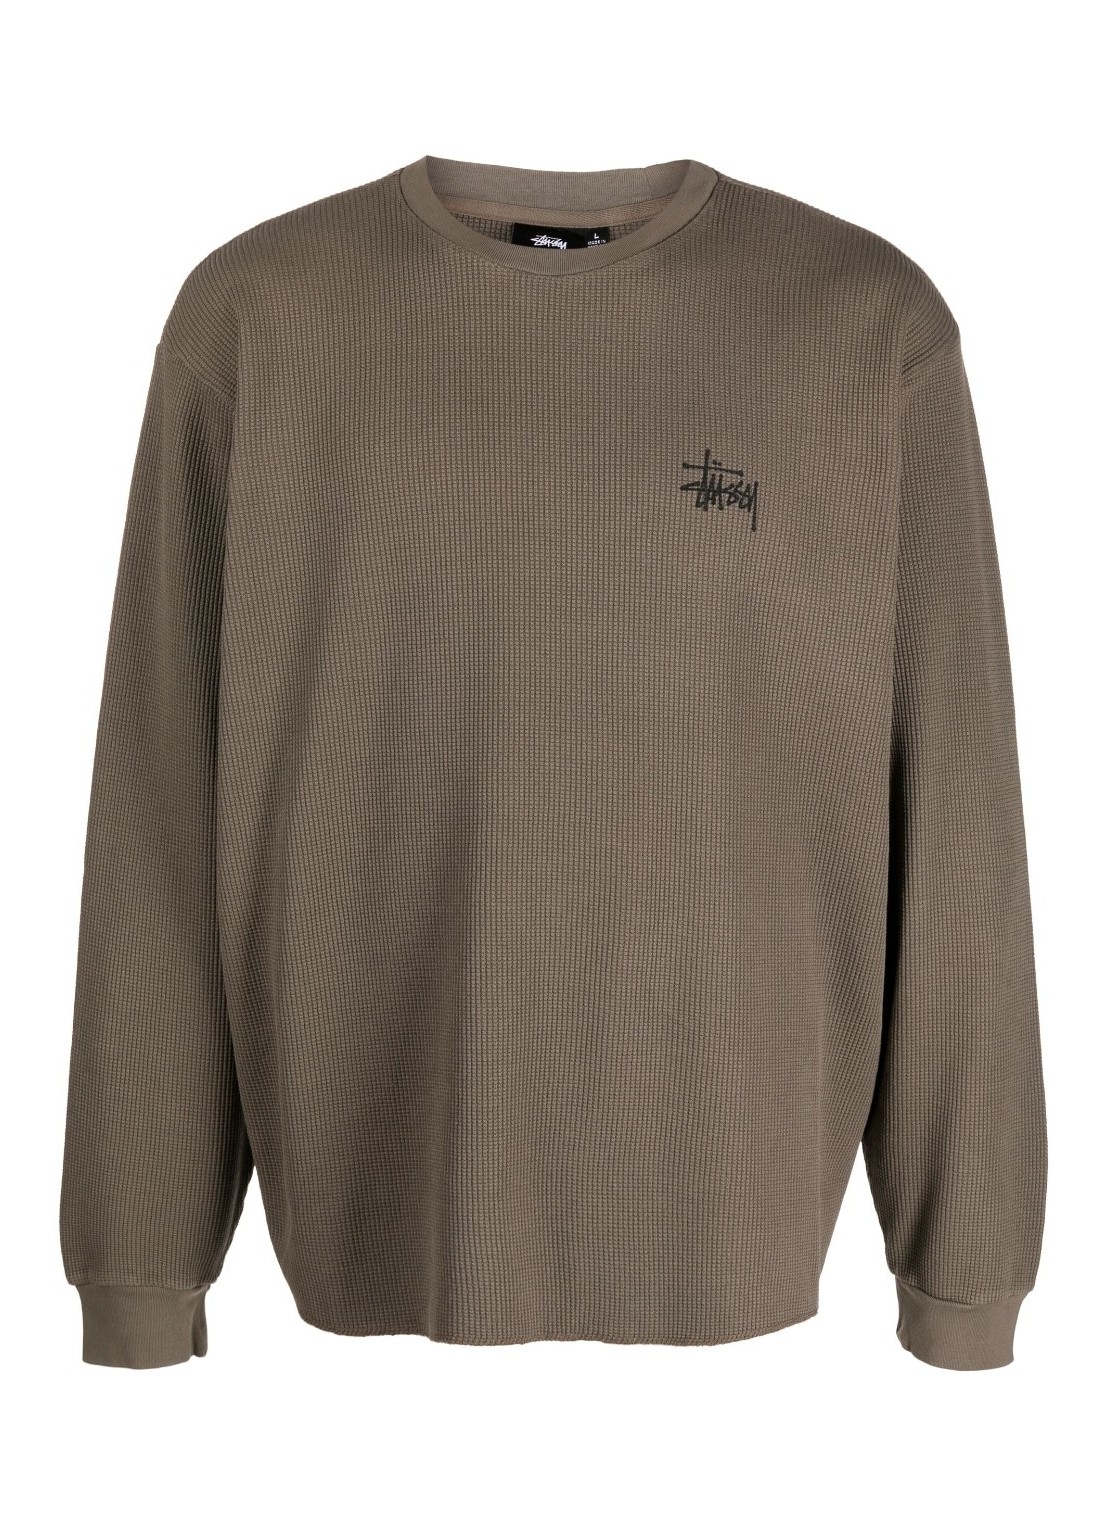 stussy o'dyed ls thermal - 1140321 brown Talla S